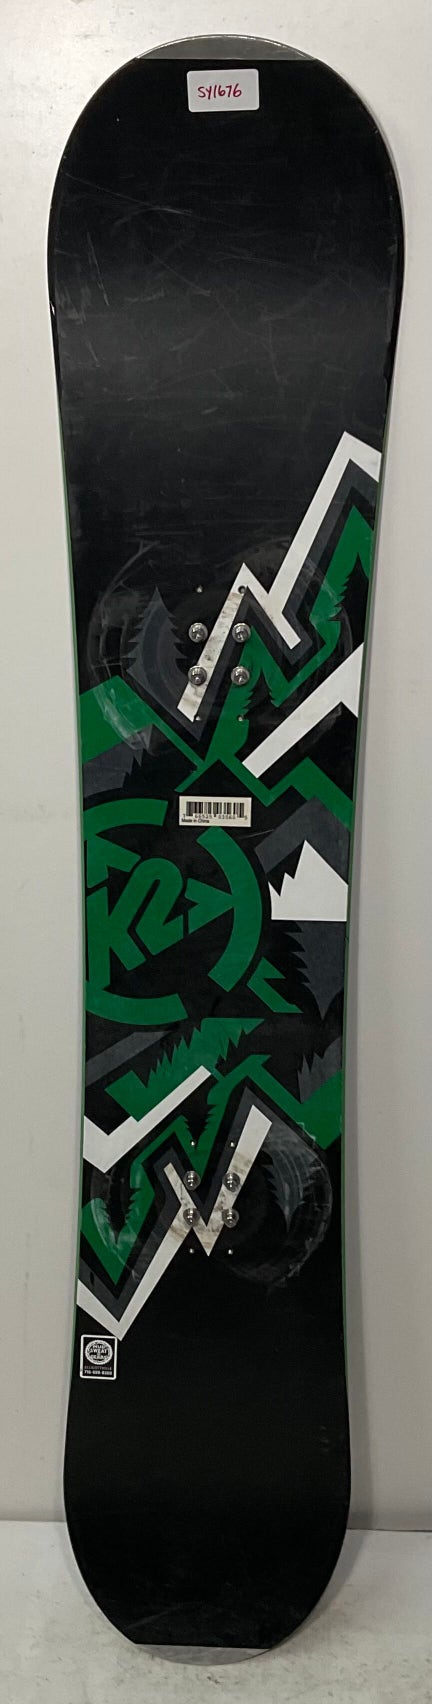 Men's Used K2 161W Snowboard Without Bindings (SY1676)